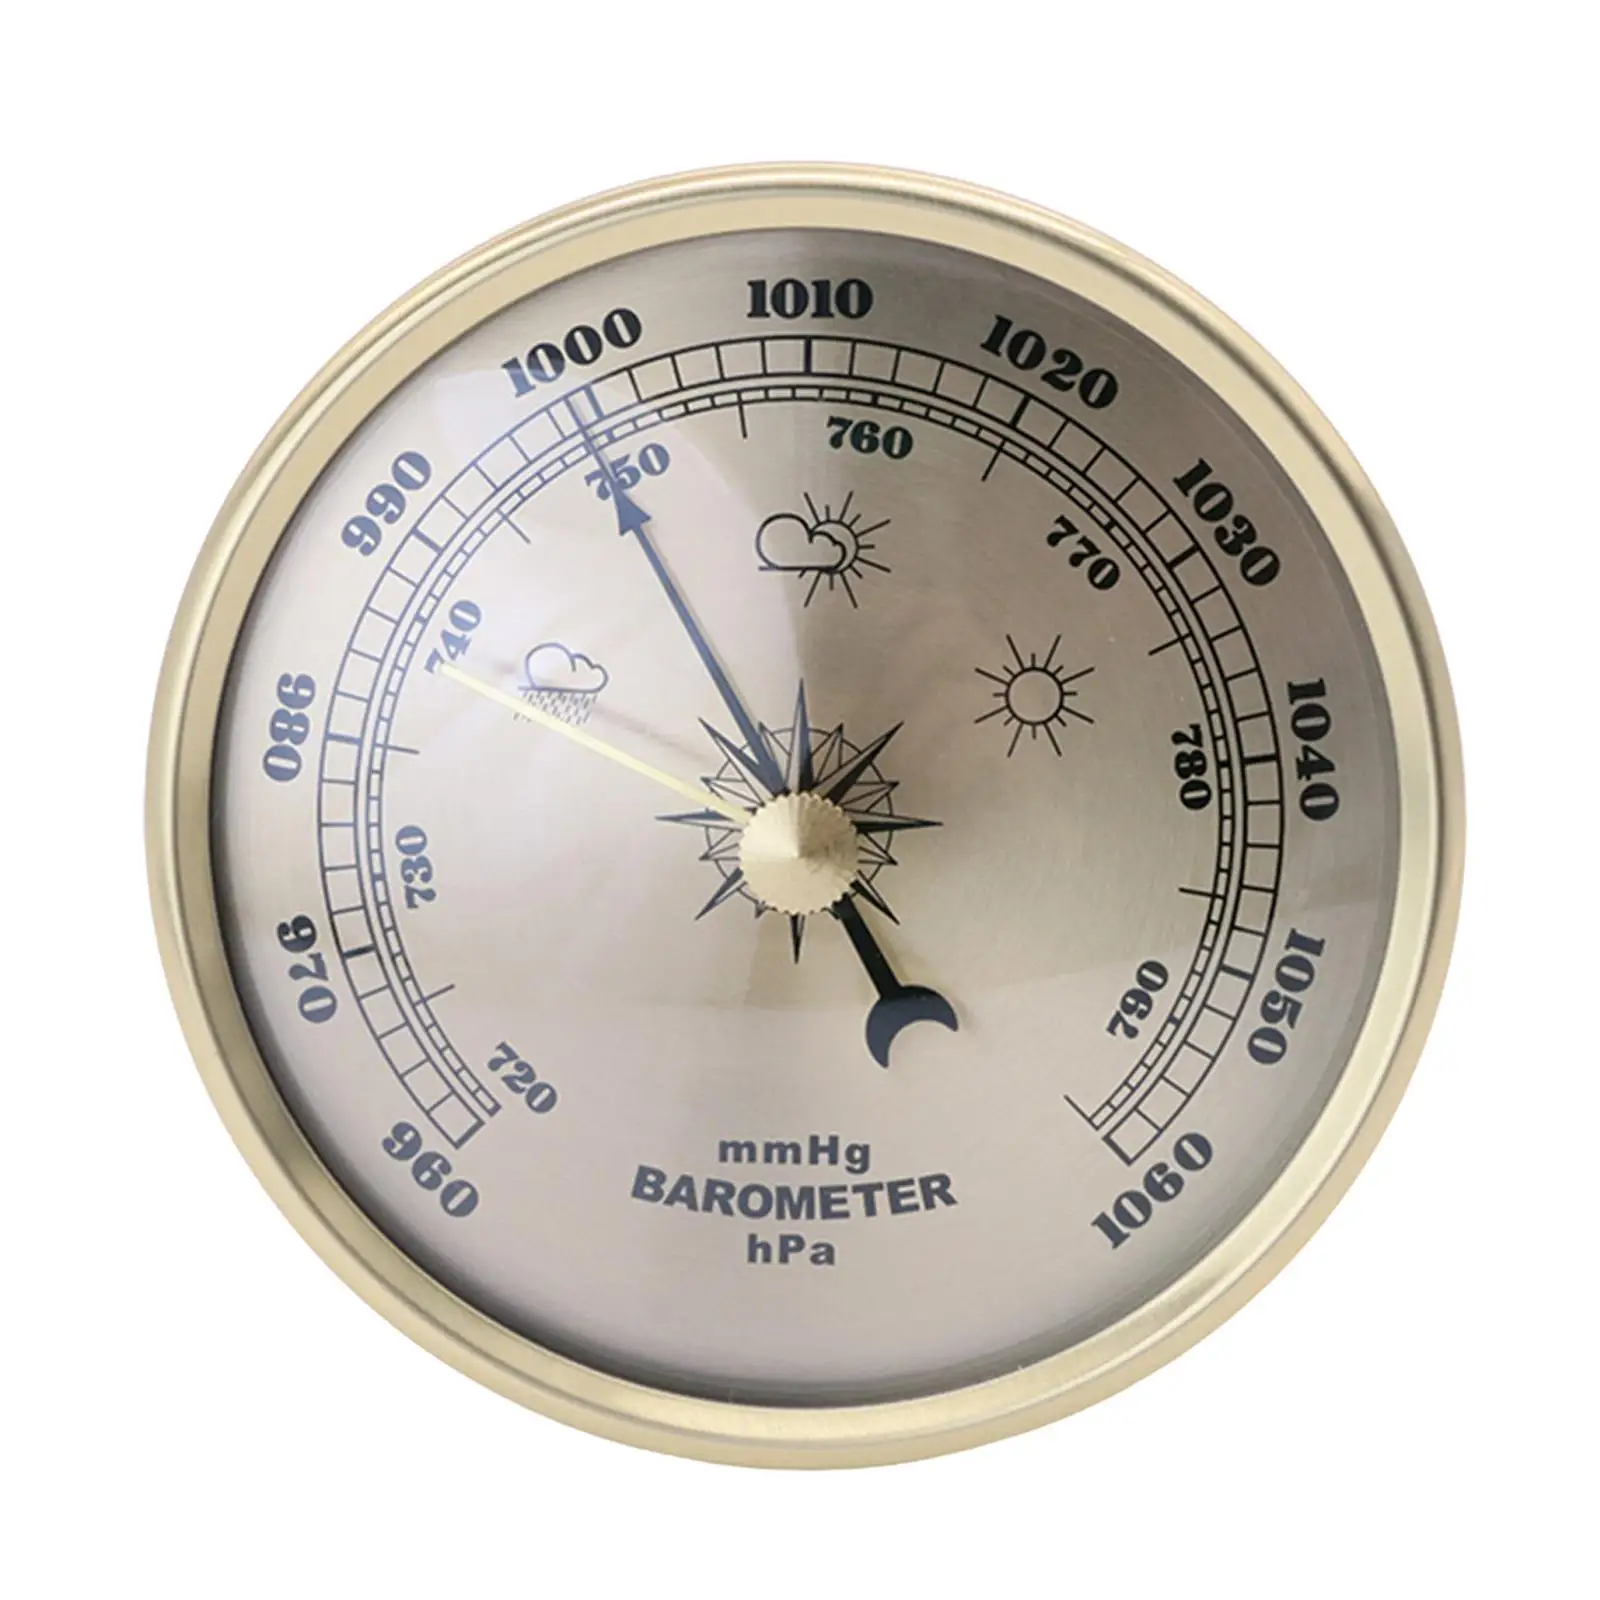 3.5`` Aneroid Barometer Wall Mounted Round Dial  Station mmHg/Hpa